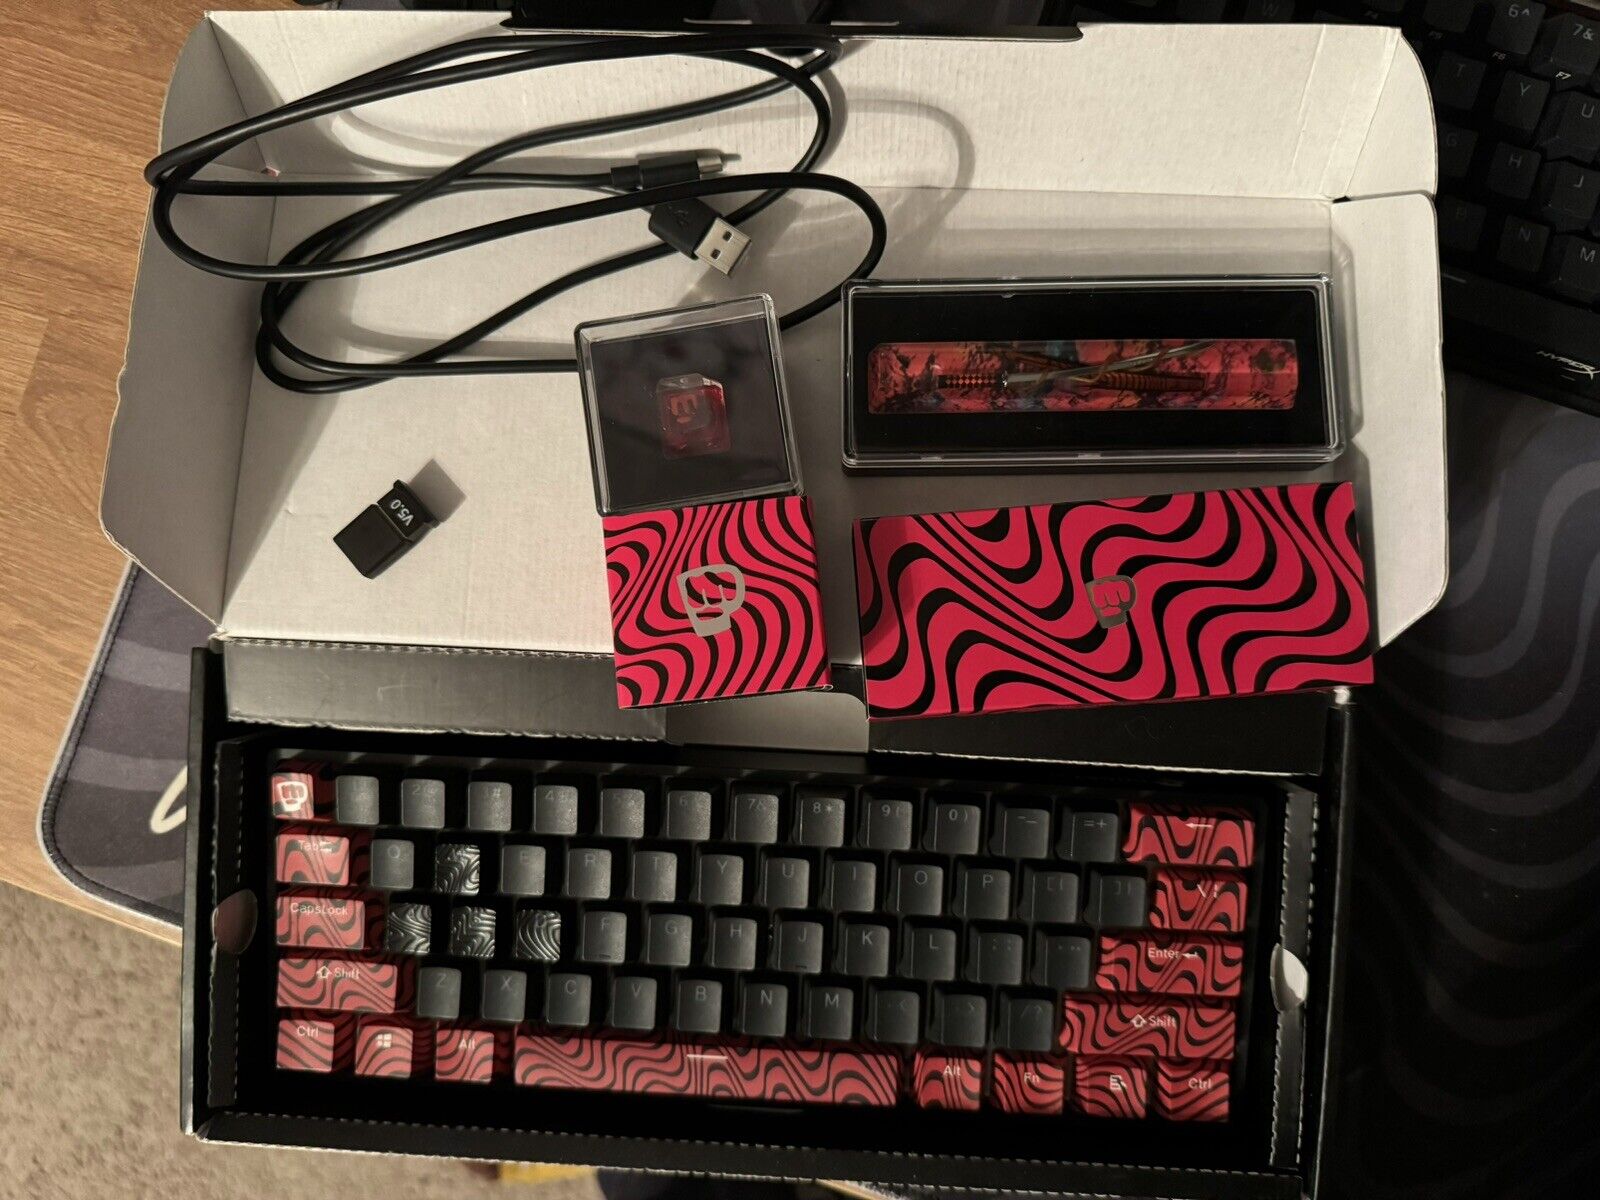 Ghost Pewdiepie A1 Wireless Aluminum Keyboard Limited Edition Keycaps